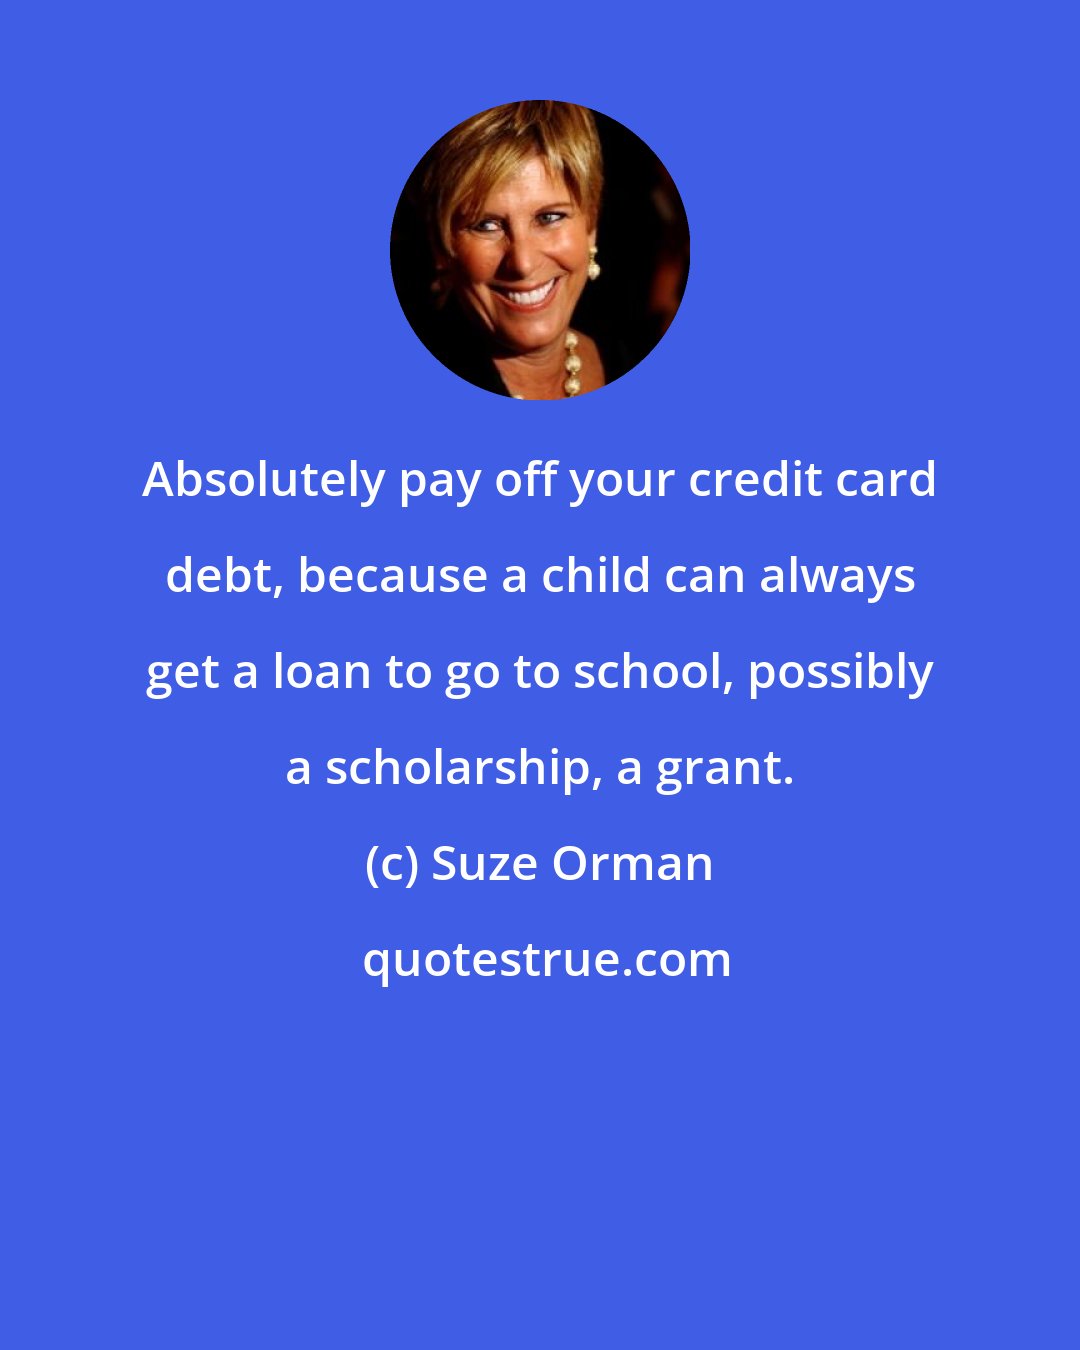 Suze Orman: Absolutely pay off your credit card debt, because a child can always get a loan to go to school, possibly a scholarship, a grant.